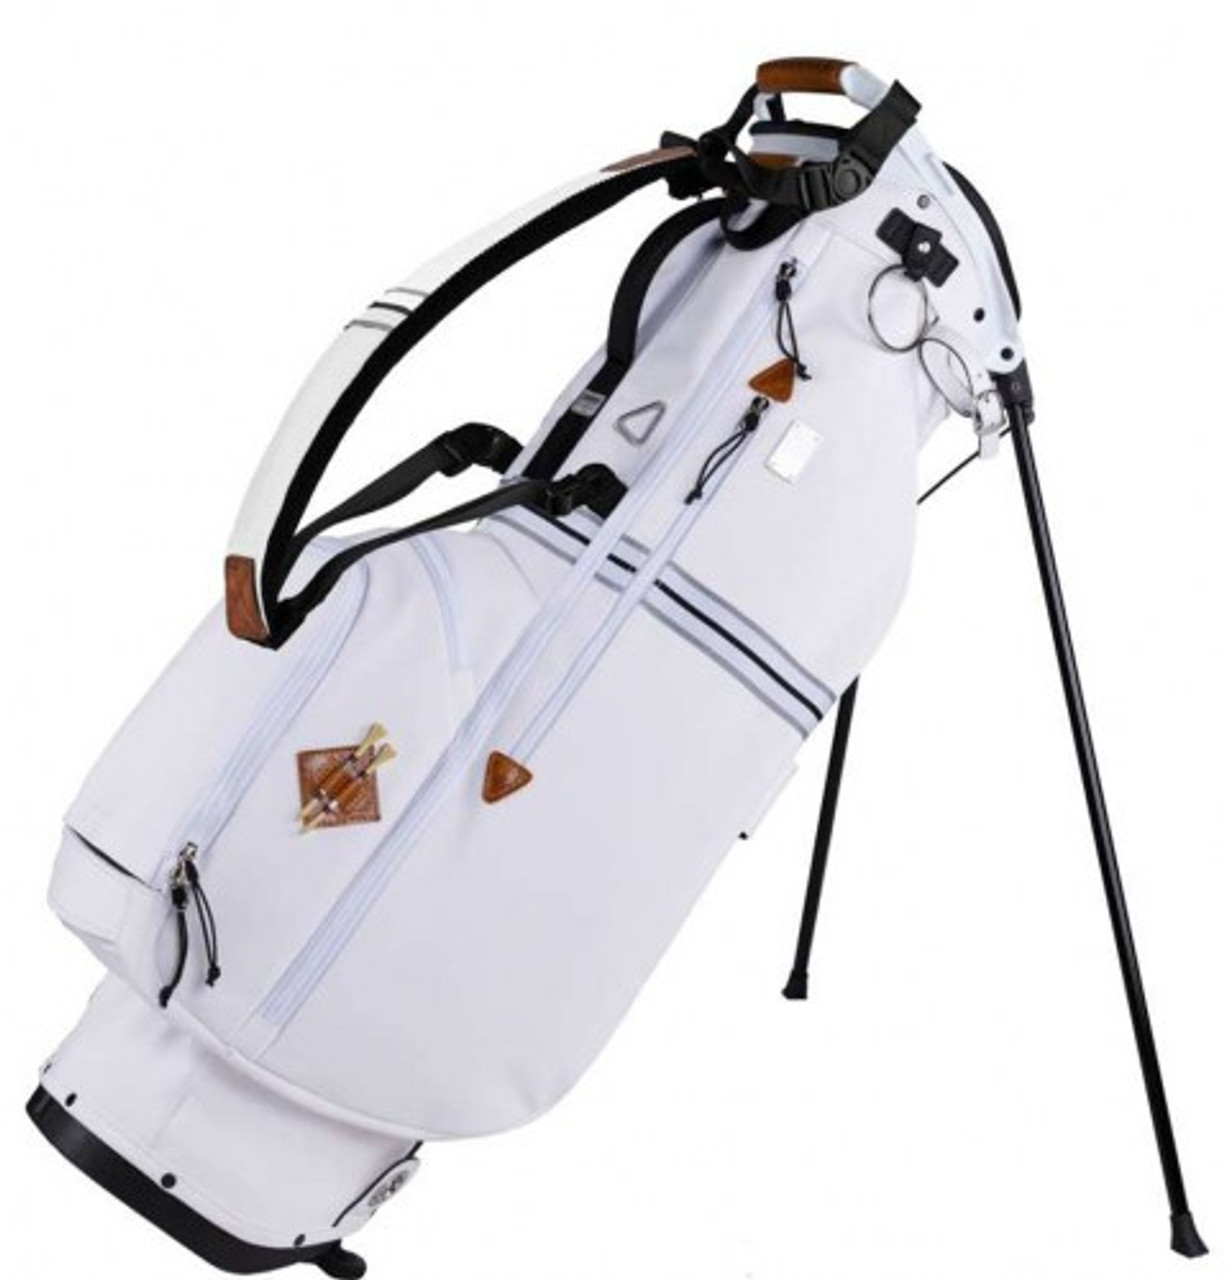 Best Travel Golf Bag // Sun Mountain ClubGlider Review - YouTube